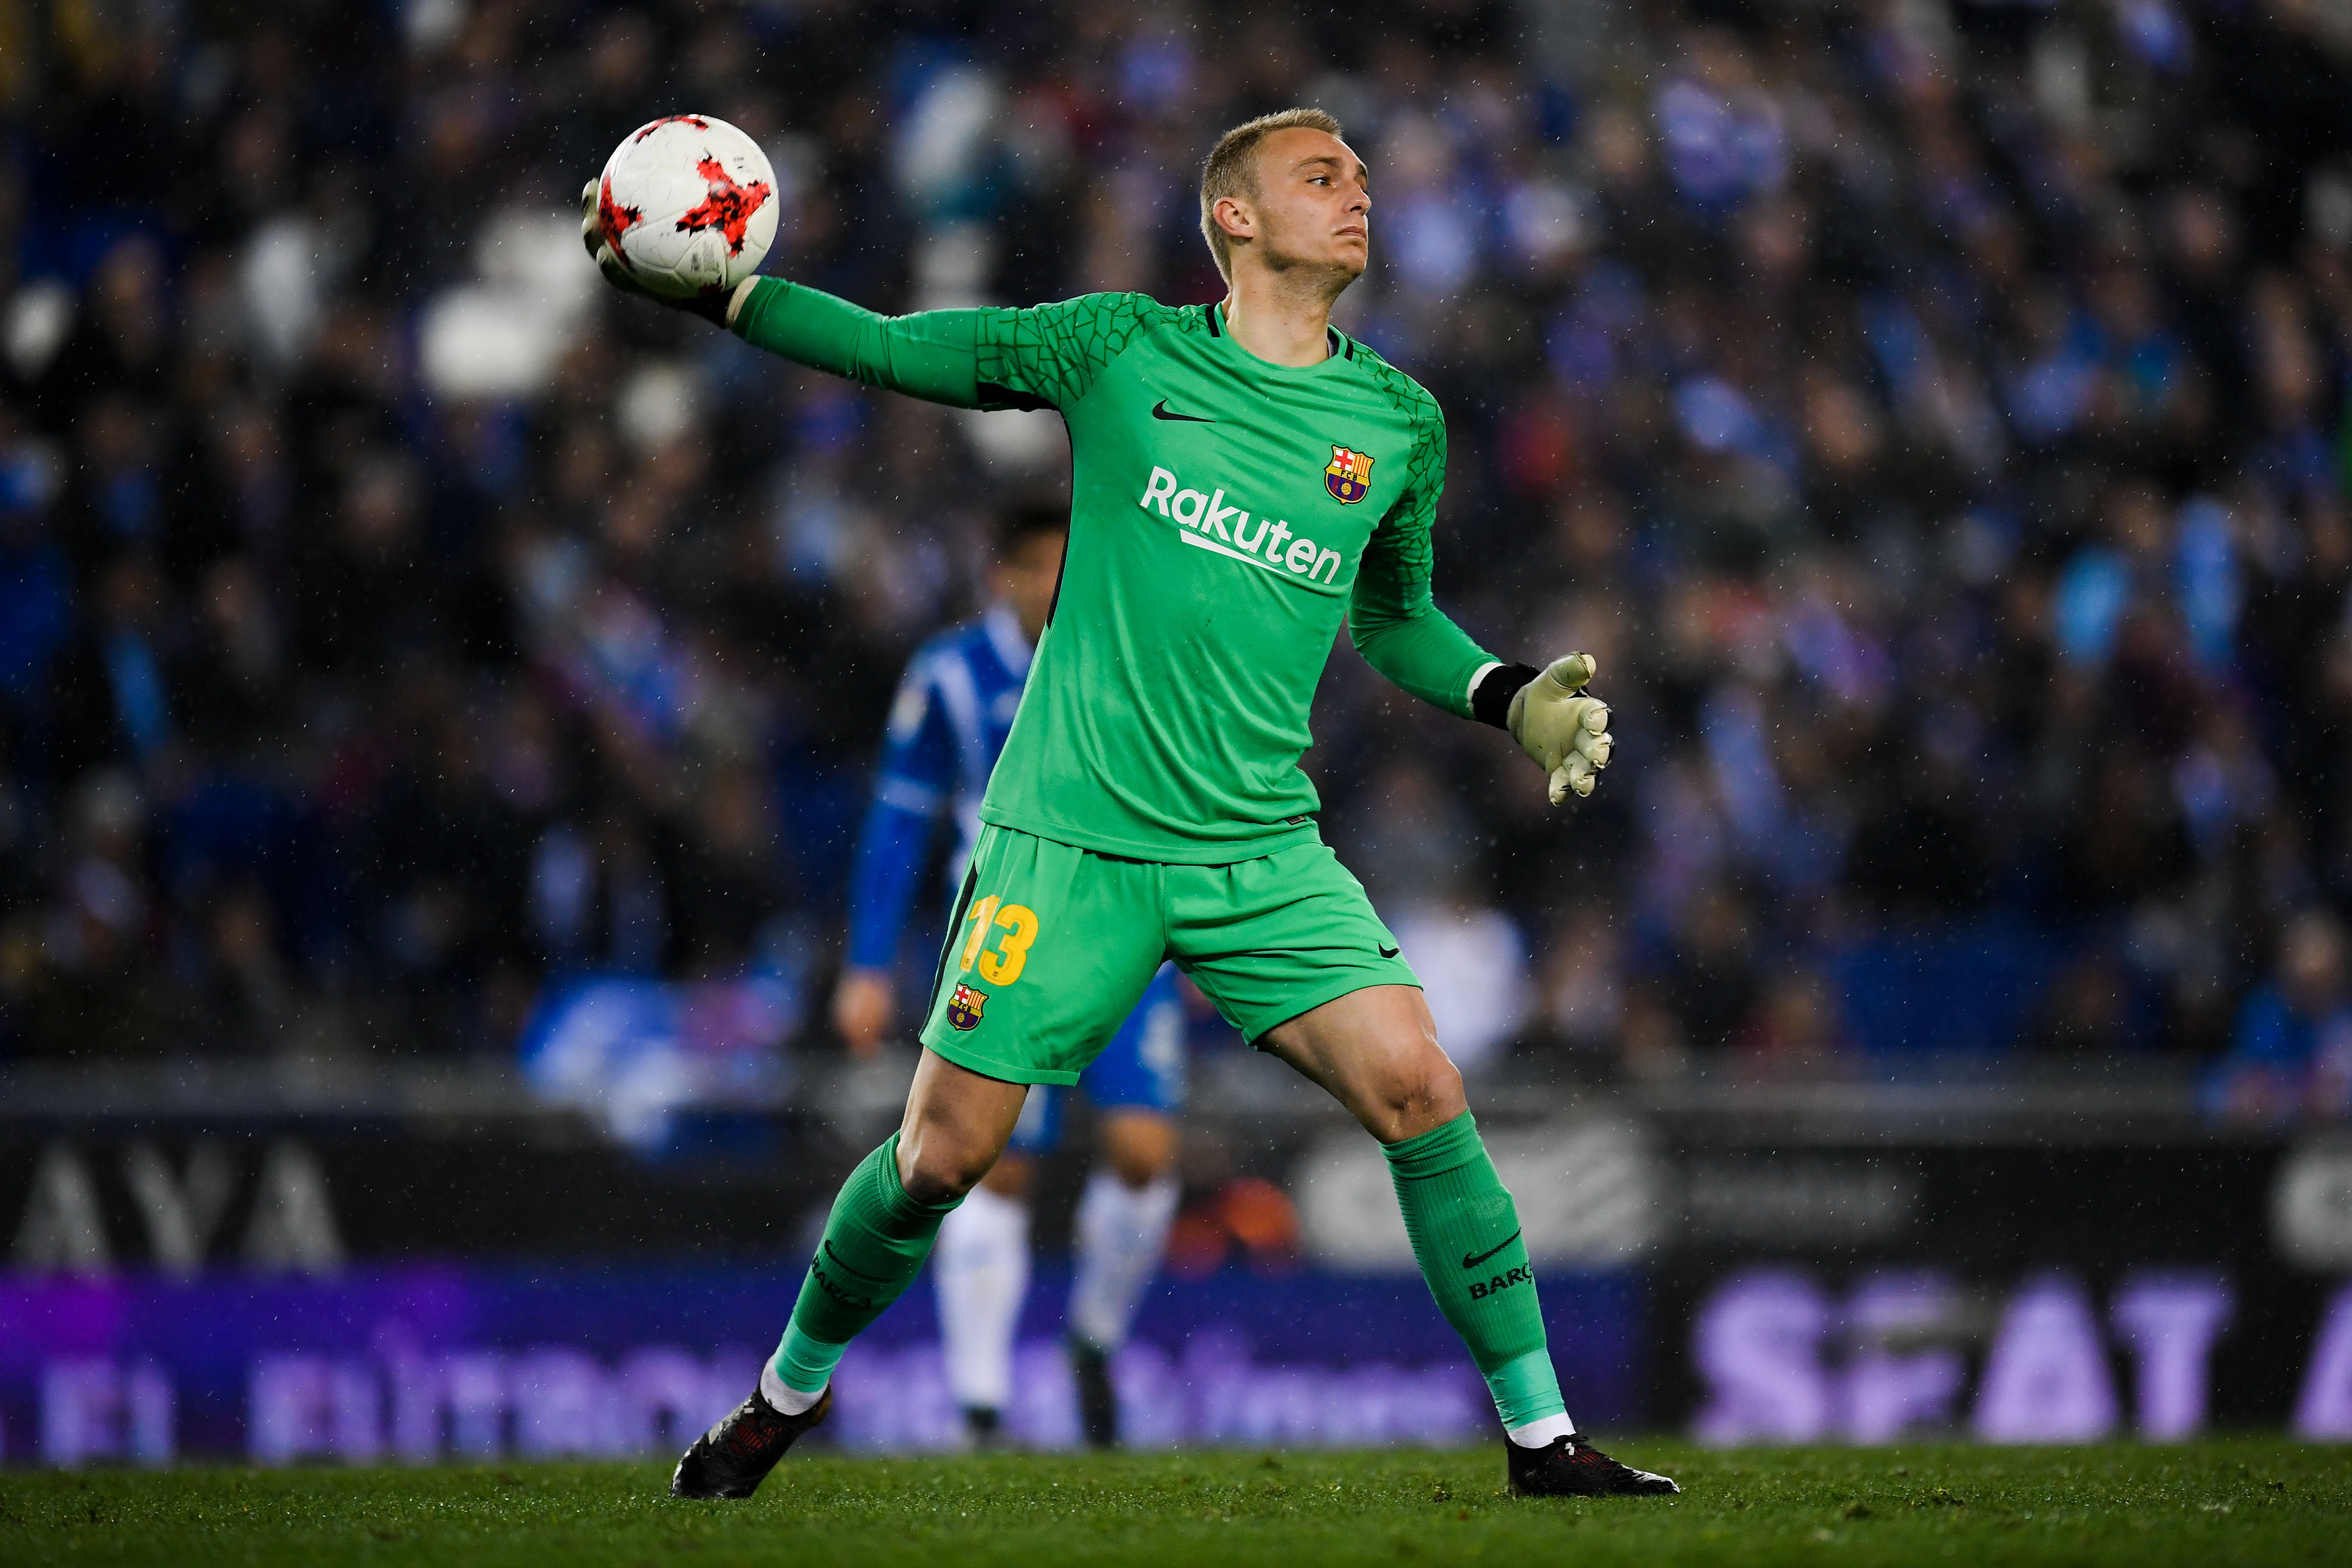 BARCELONA, SPAIN - JANUARY 17:  Jasper Cillessen of FC Barcelona in action during the Copa del Rey Quarter Final Firs Leg match between Espanyol and FC Barcelona at Nuevo Estadio de Cornella-El Prat on January 17, 2018 in Barcelona, Spain.  (Photo by David Ramos/Getty Images)